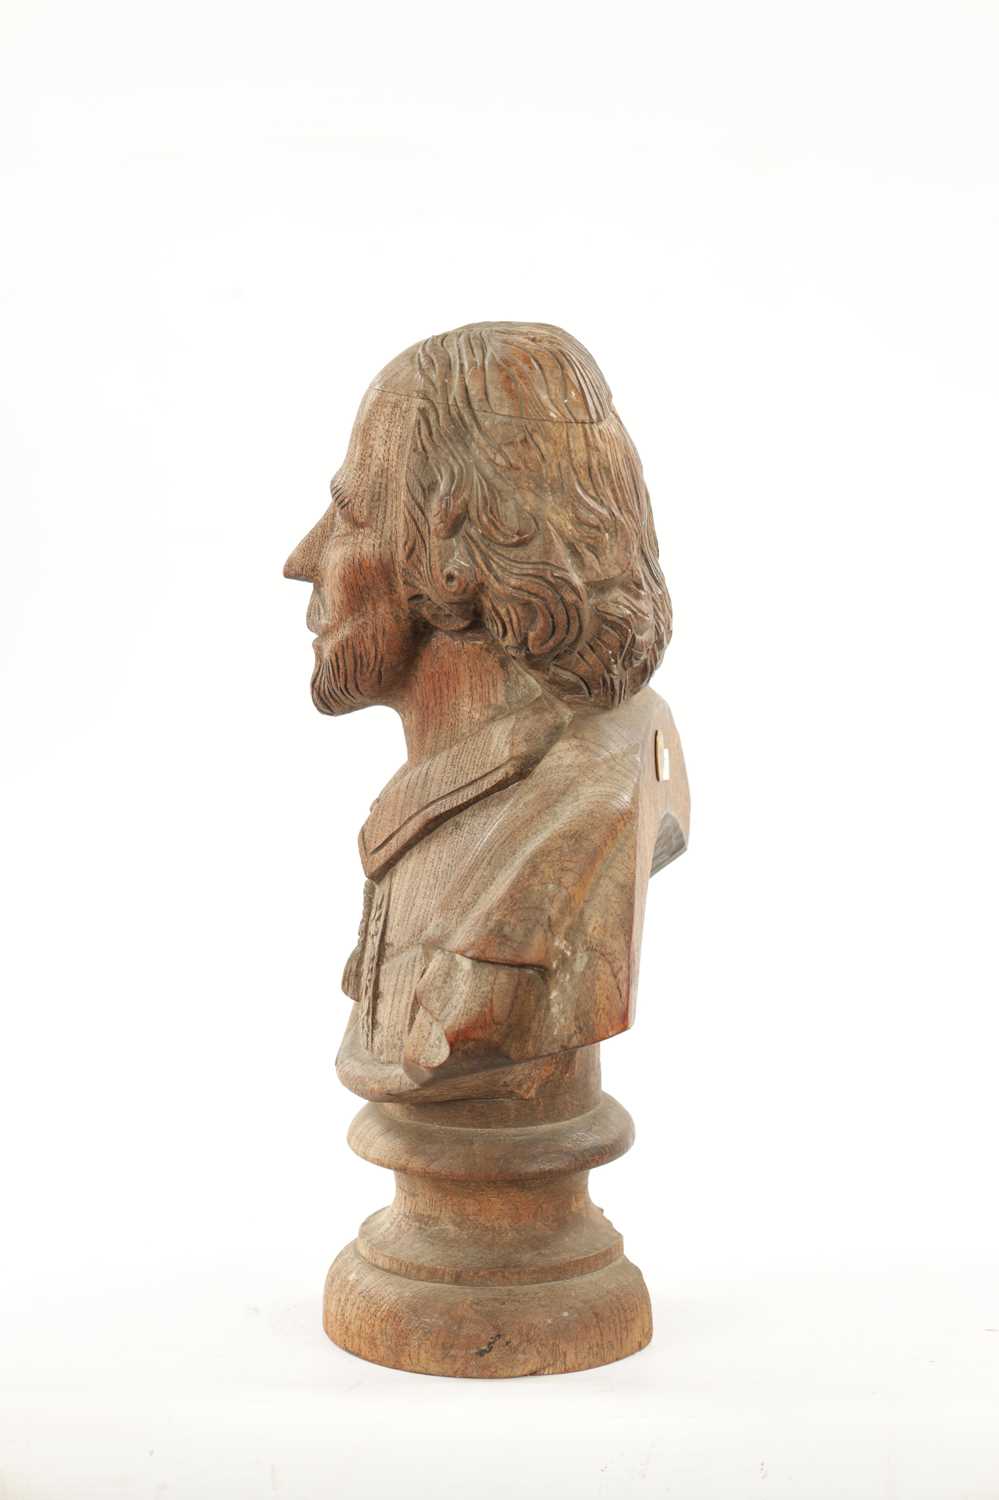 A LATE 19TH CENTURY CARVED WOODEN BUST OF SHAKESPEARE - Image 5 of 8